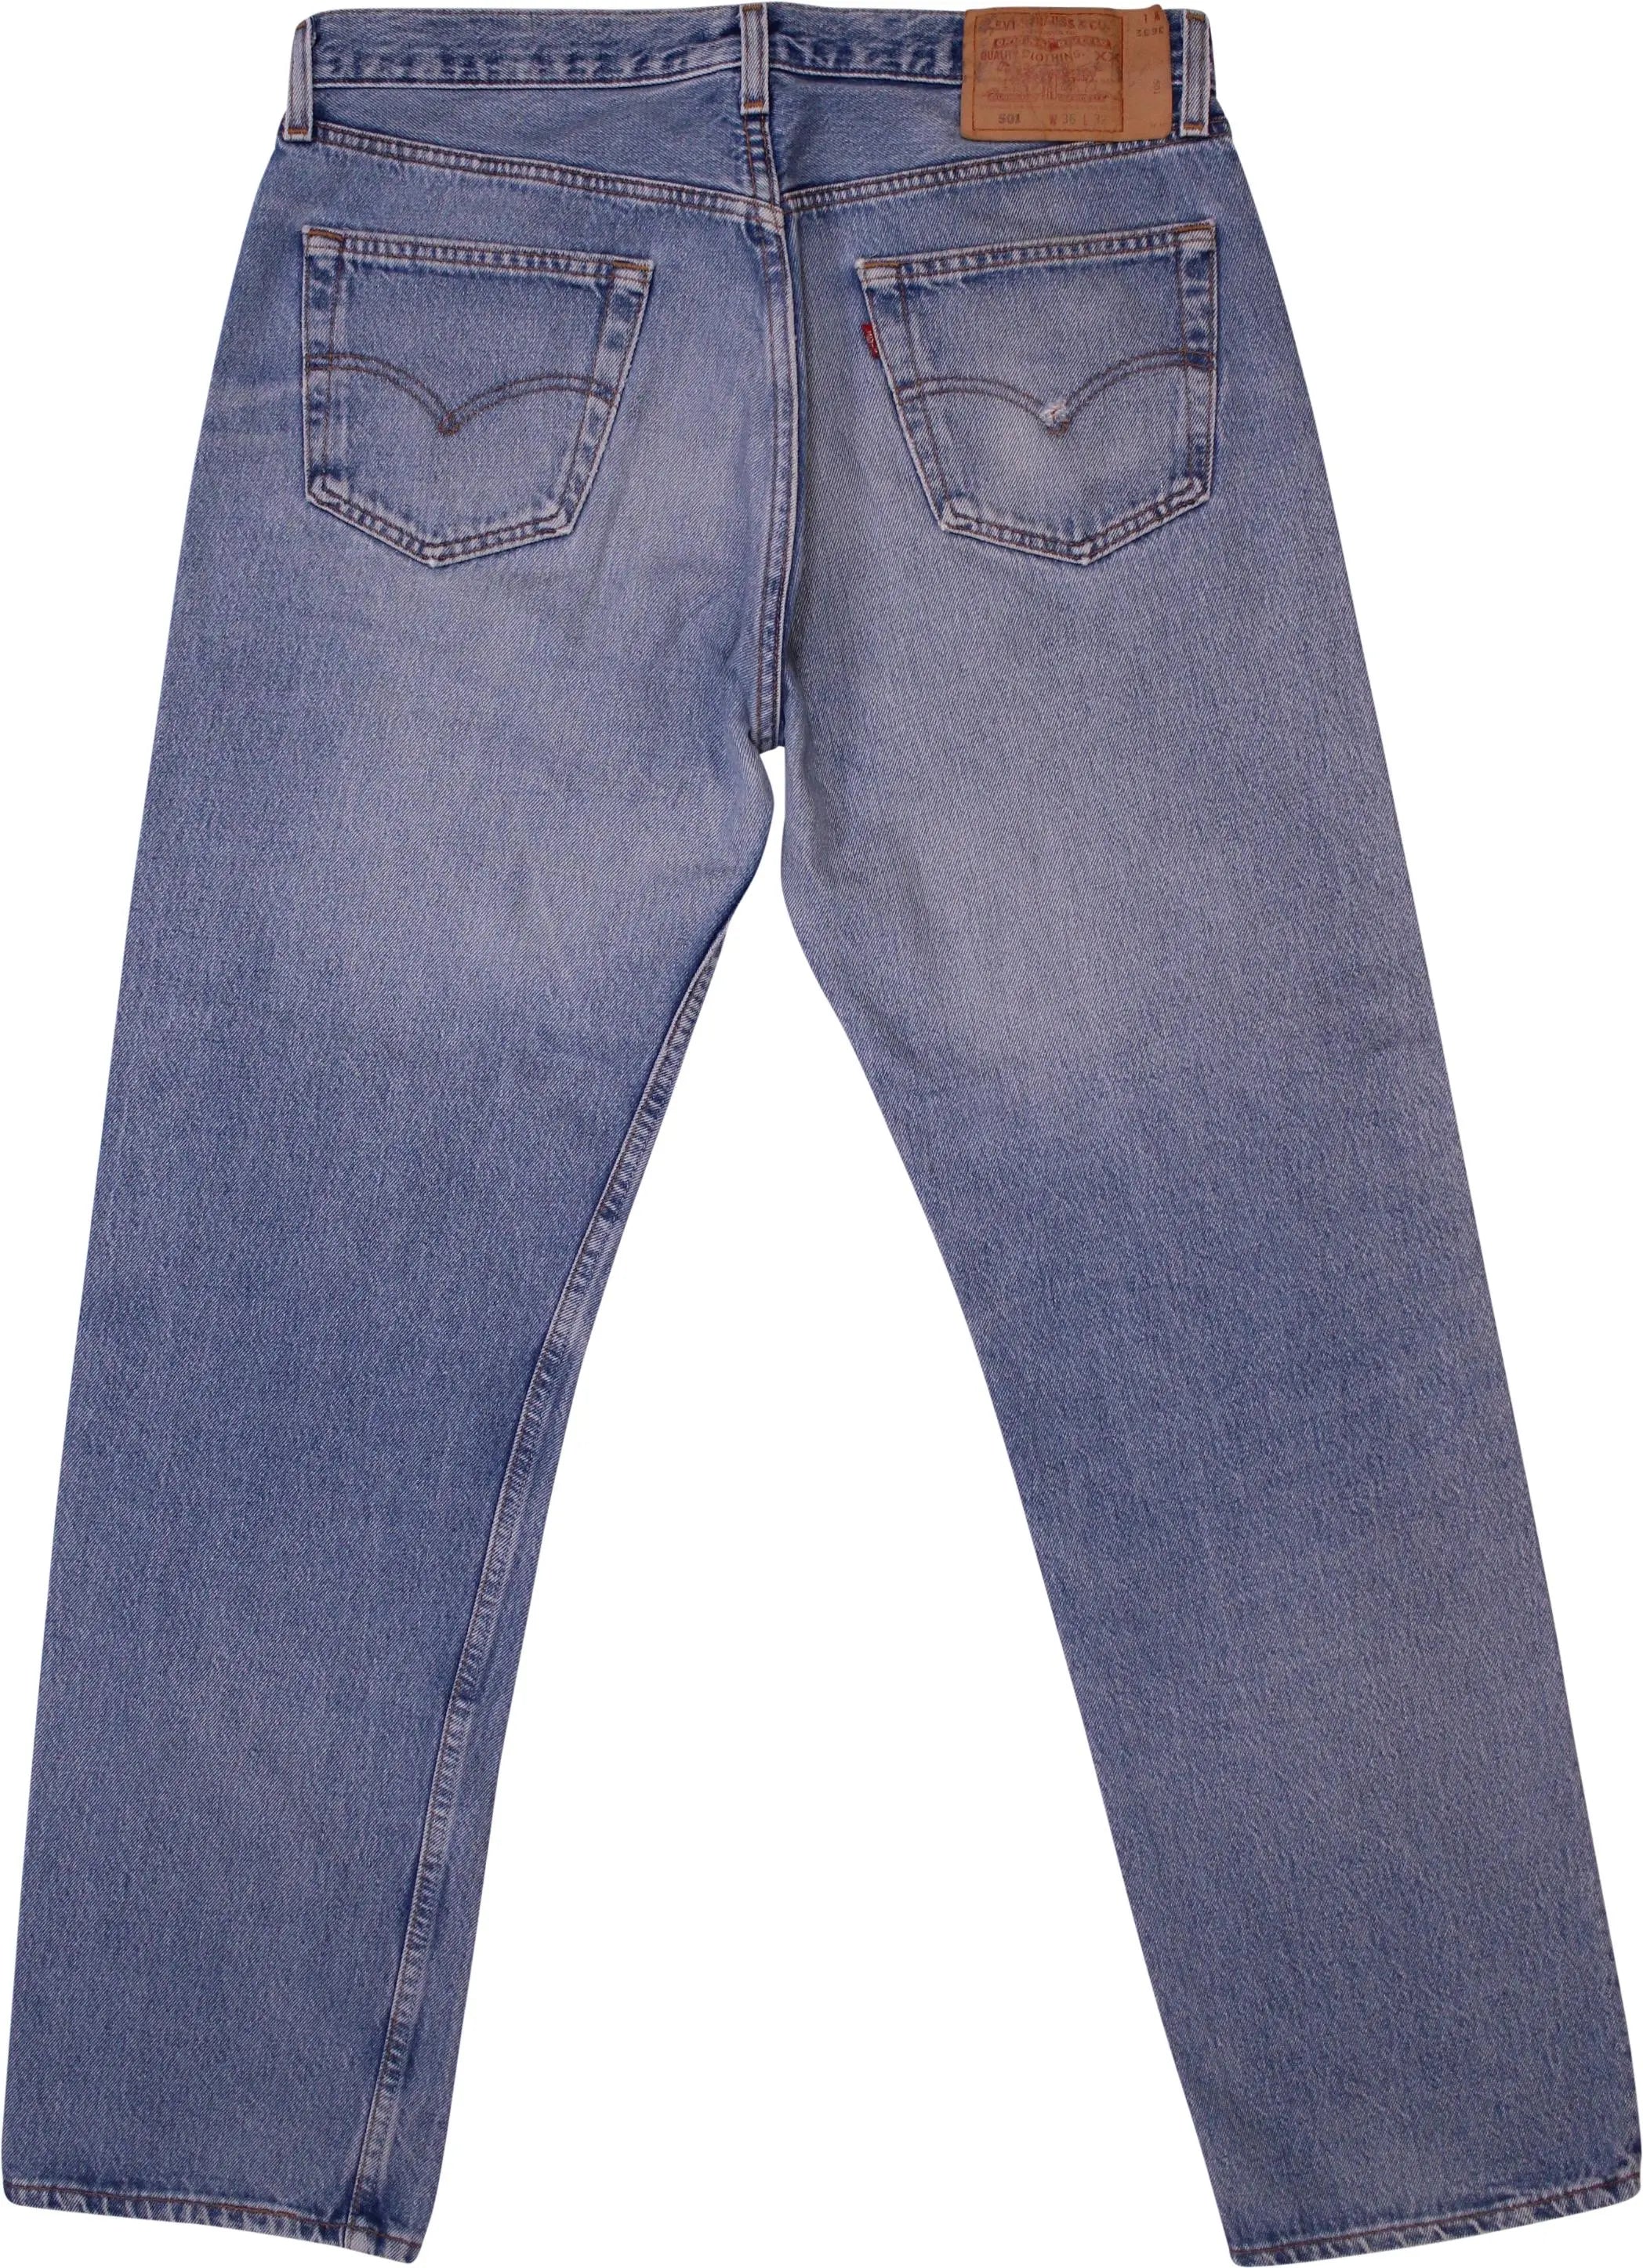 Levi's - Levi's 501 Jeans- ThriftTale.com - Vintage and second handclothing